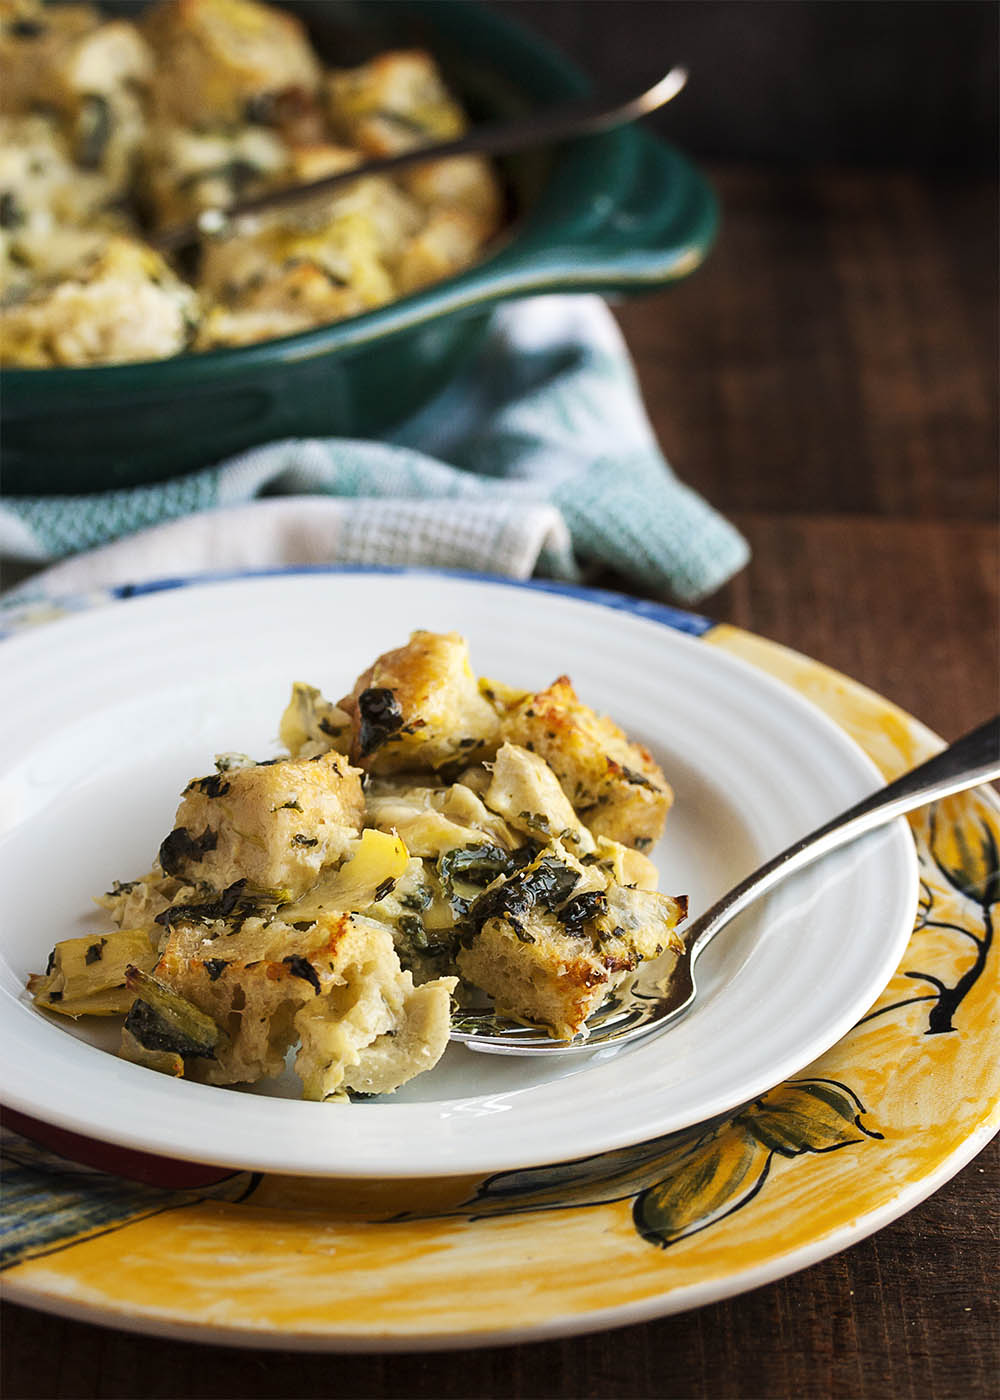 Spinach Artichoke Bread Pudding - This creamy, cheesy bread pudding full of diced artichokes and chopped spinach is the perfect way to use up that stale bread in your cupboard and turn it into a yummy, flavor-packed side dish. | justalittlebitofbacon.com